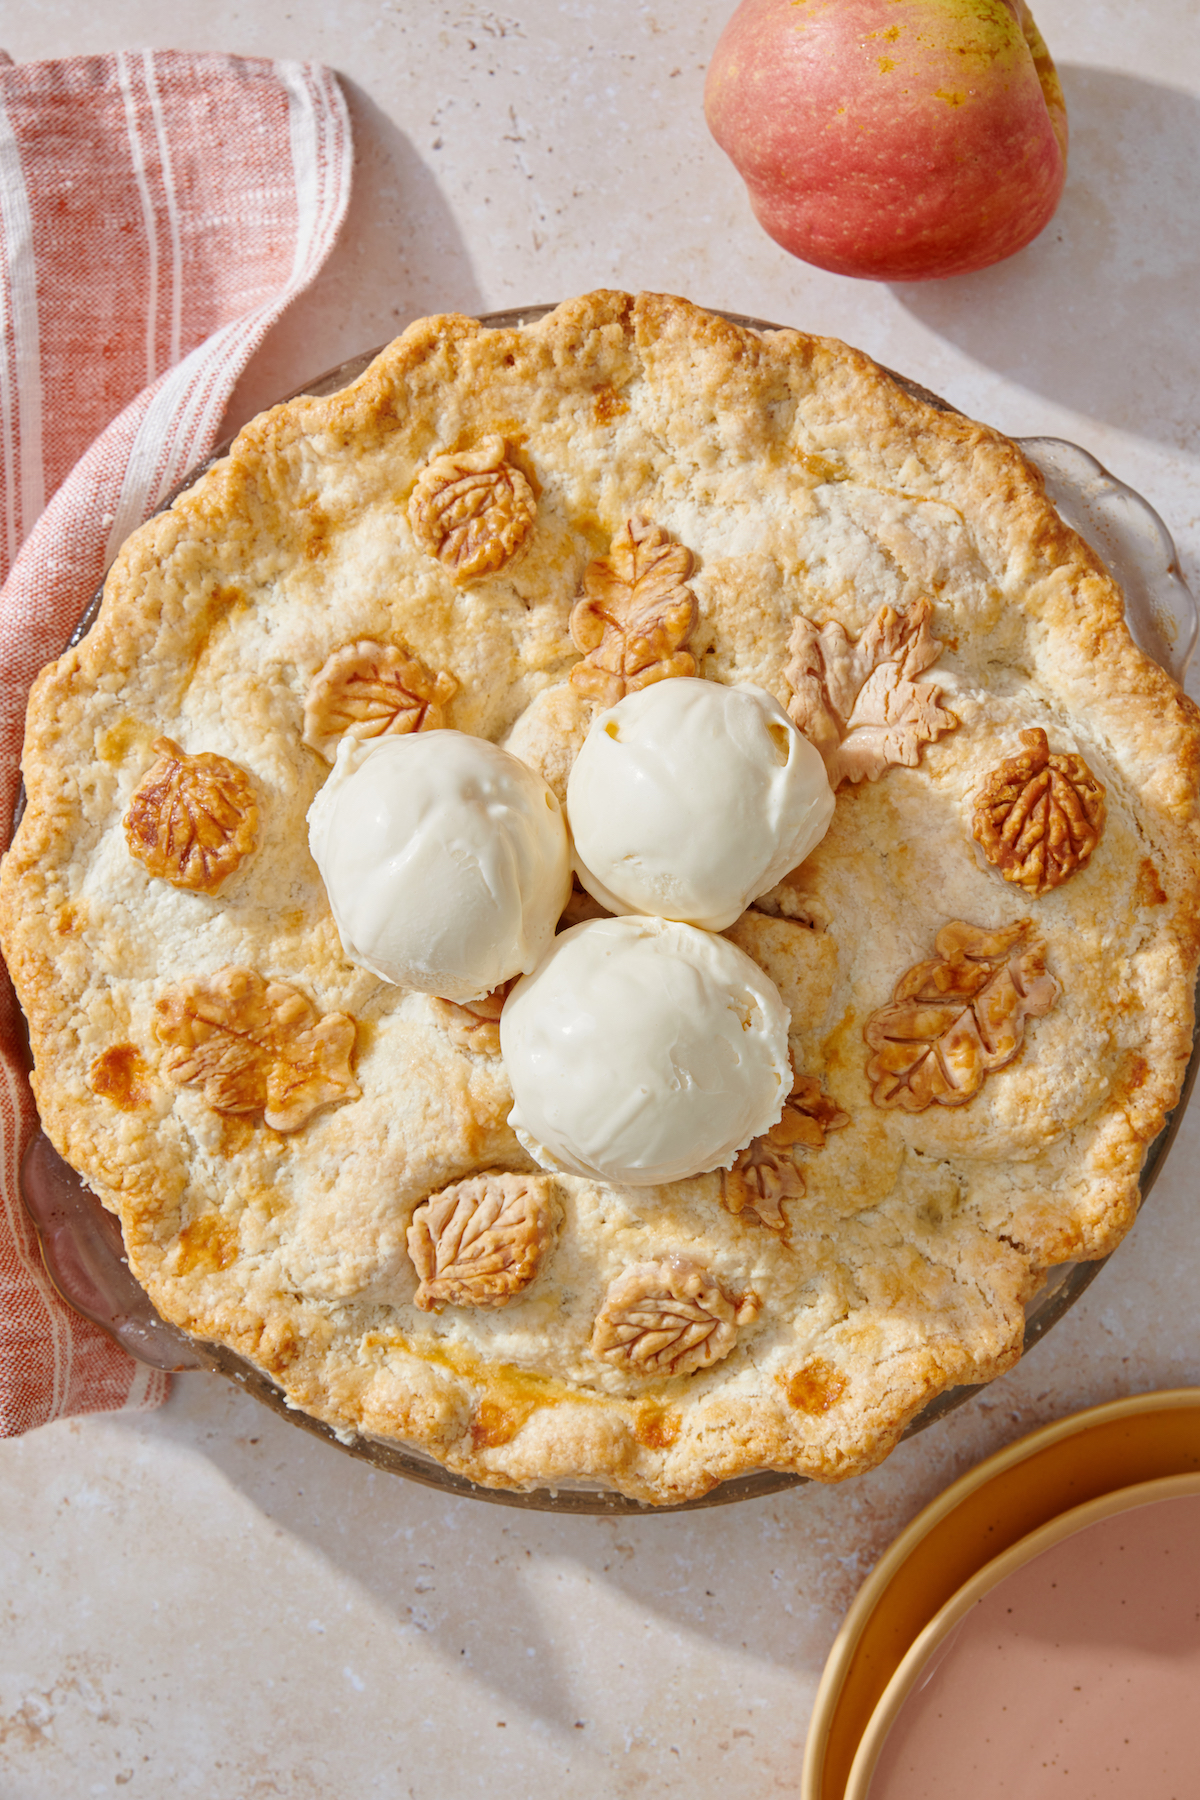 Apple pie topped with ice cream.